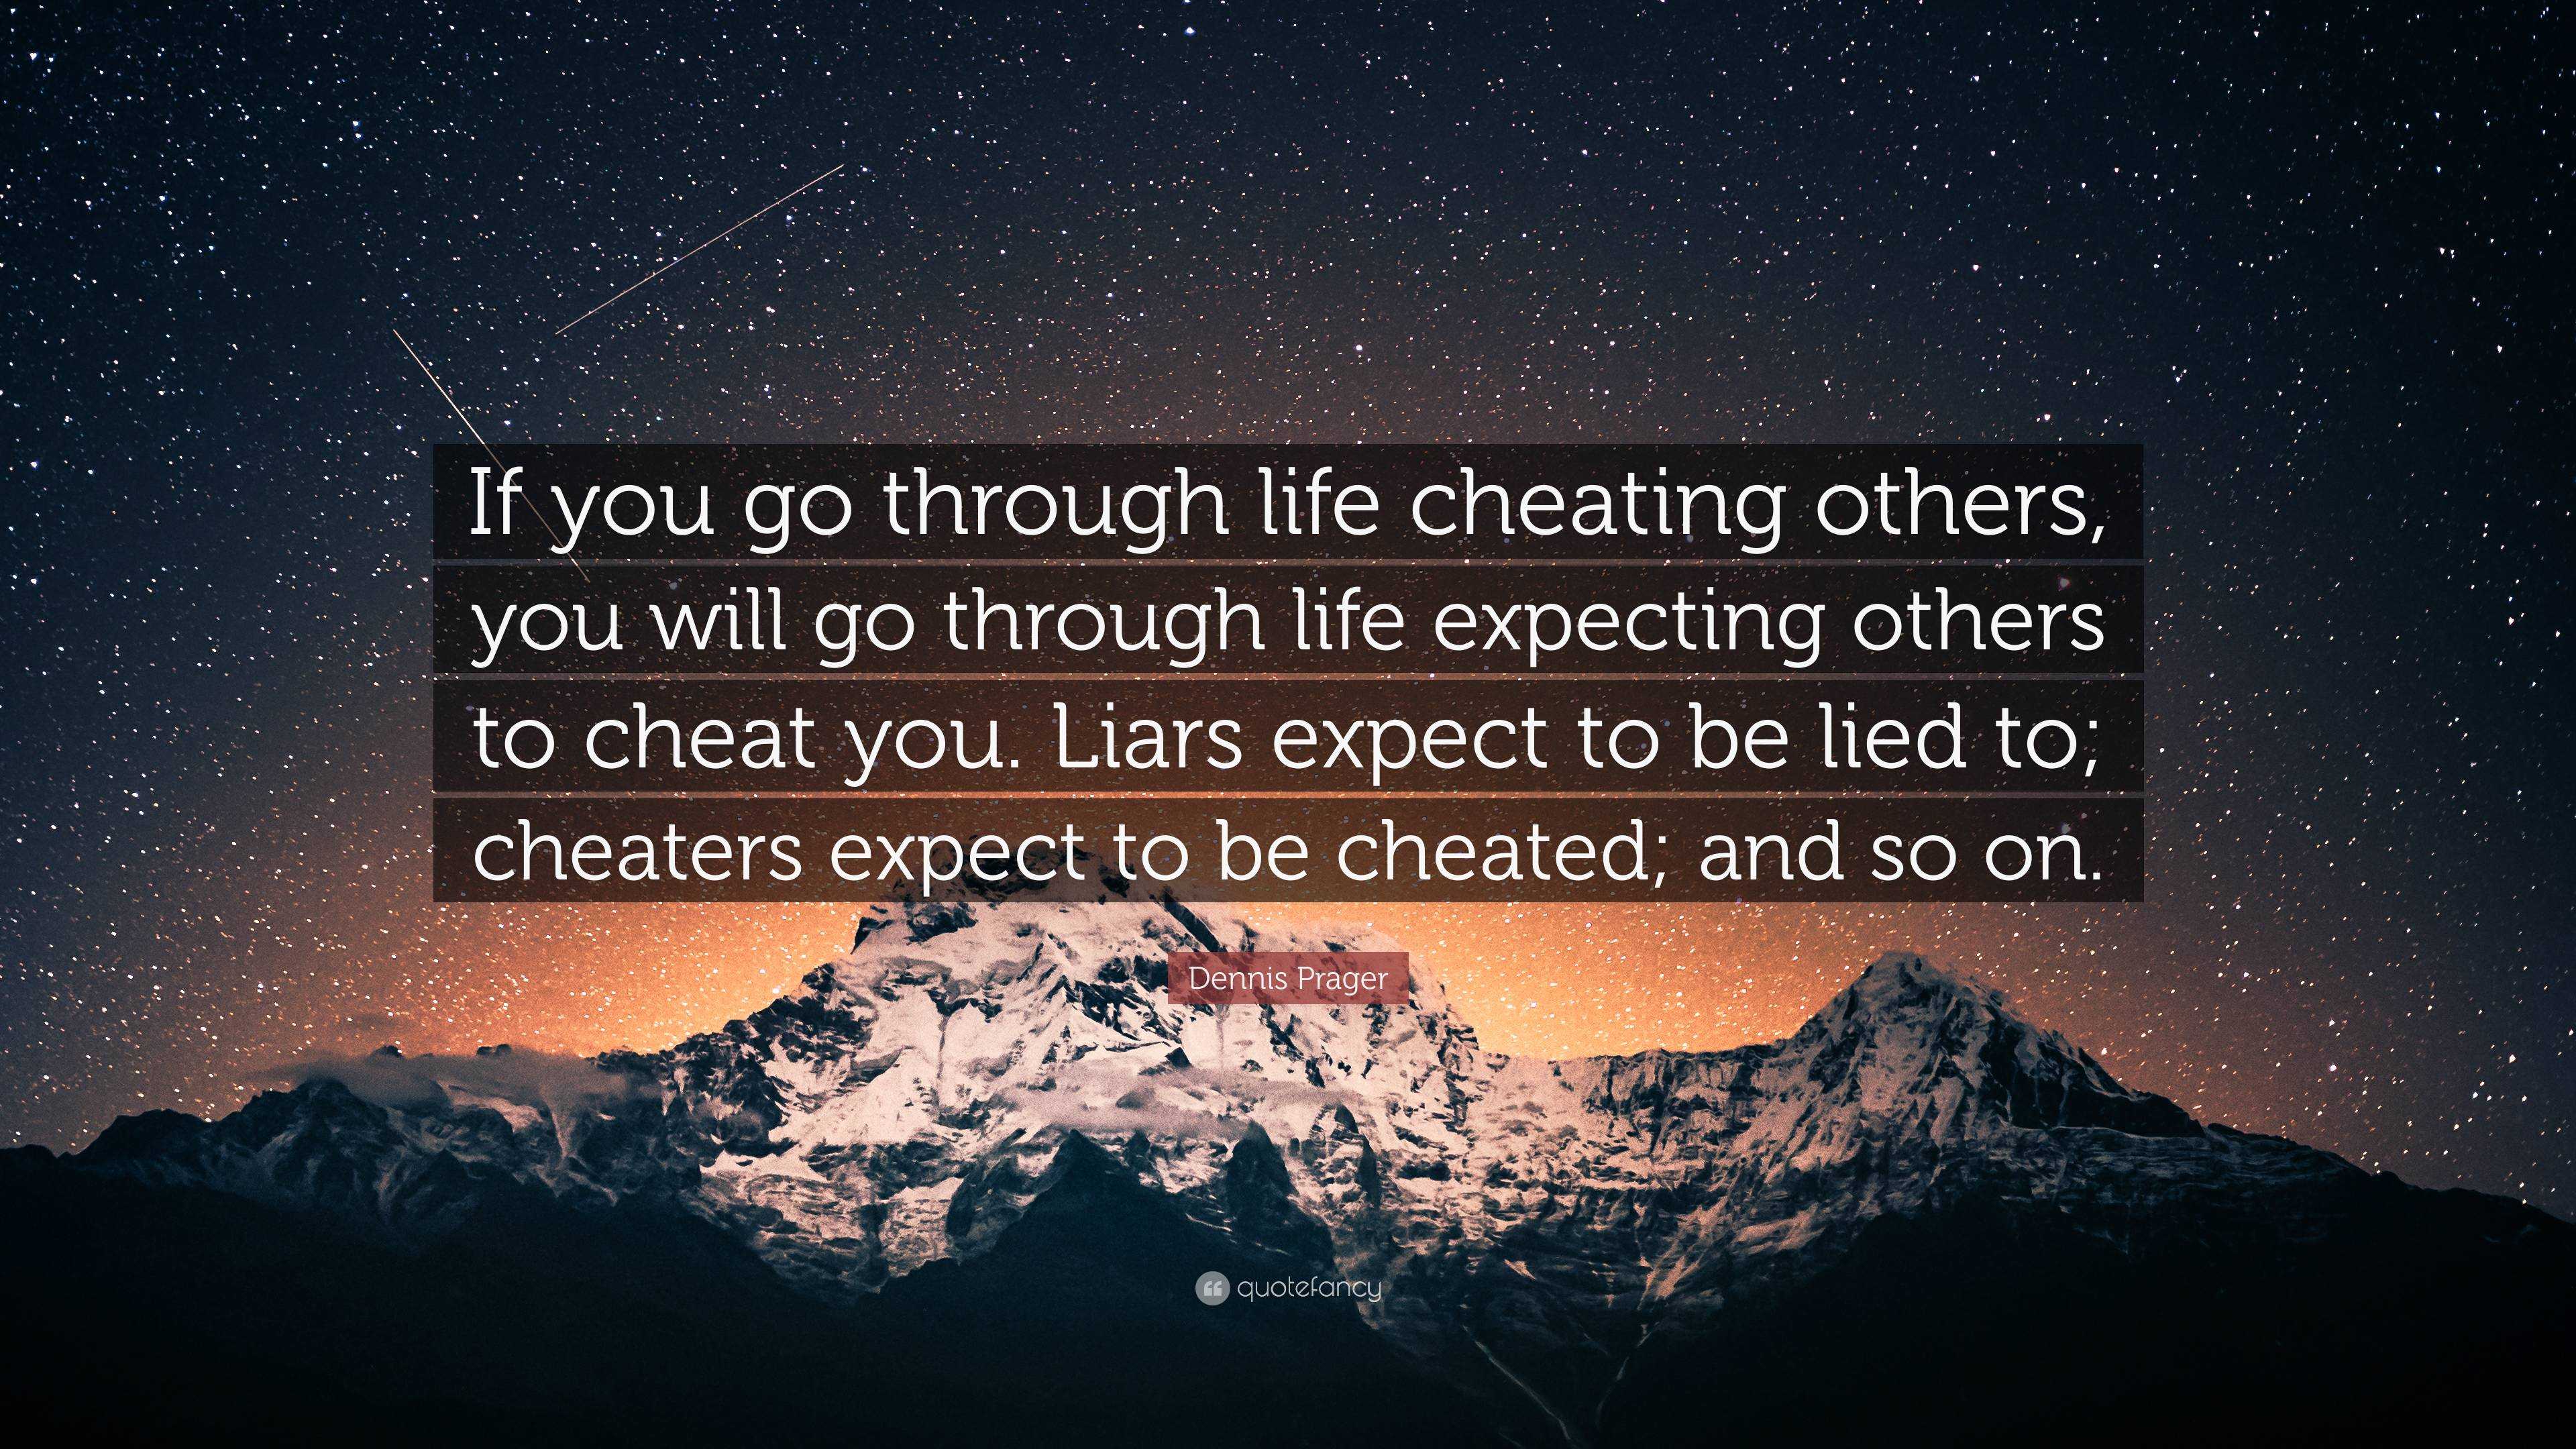 Dennis Prager Quote: “If you go through life cheating others, you will go  through life expecting others to cheat you. Liars expect to be lied ...”